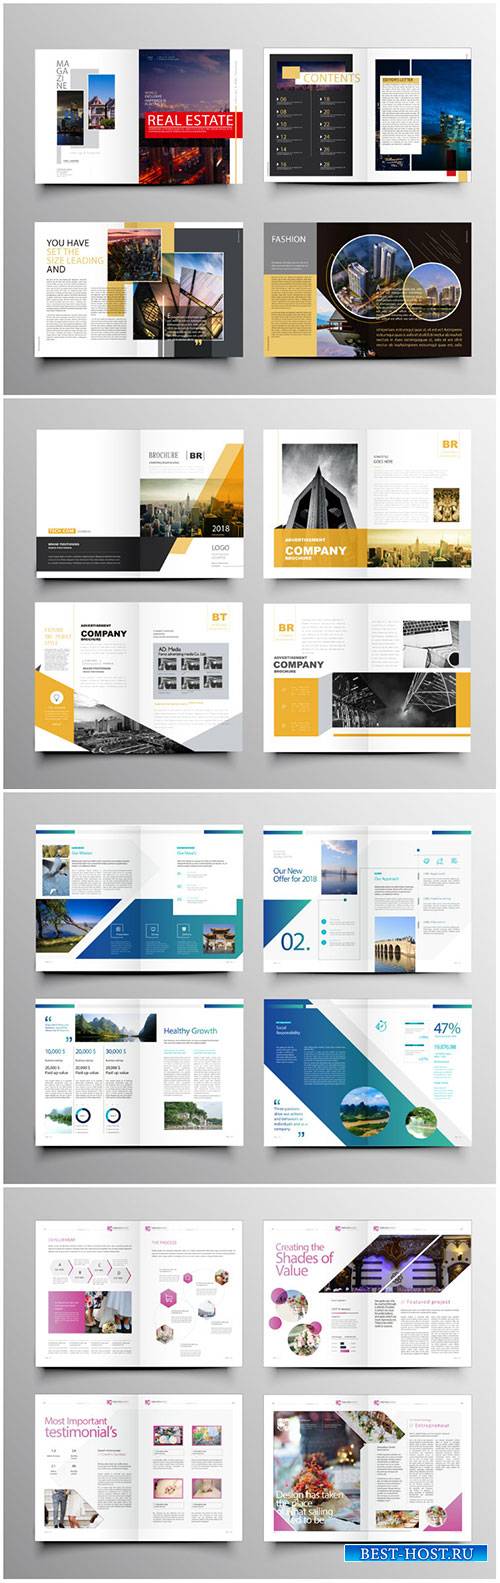 Brochure template vector layout design, corporate business annual report, magazine, flyer mockup # 229